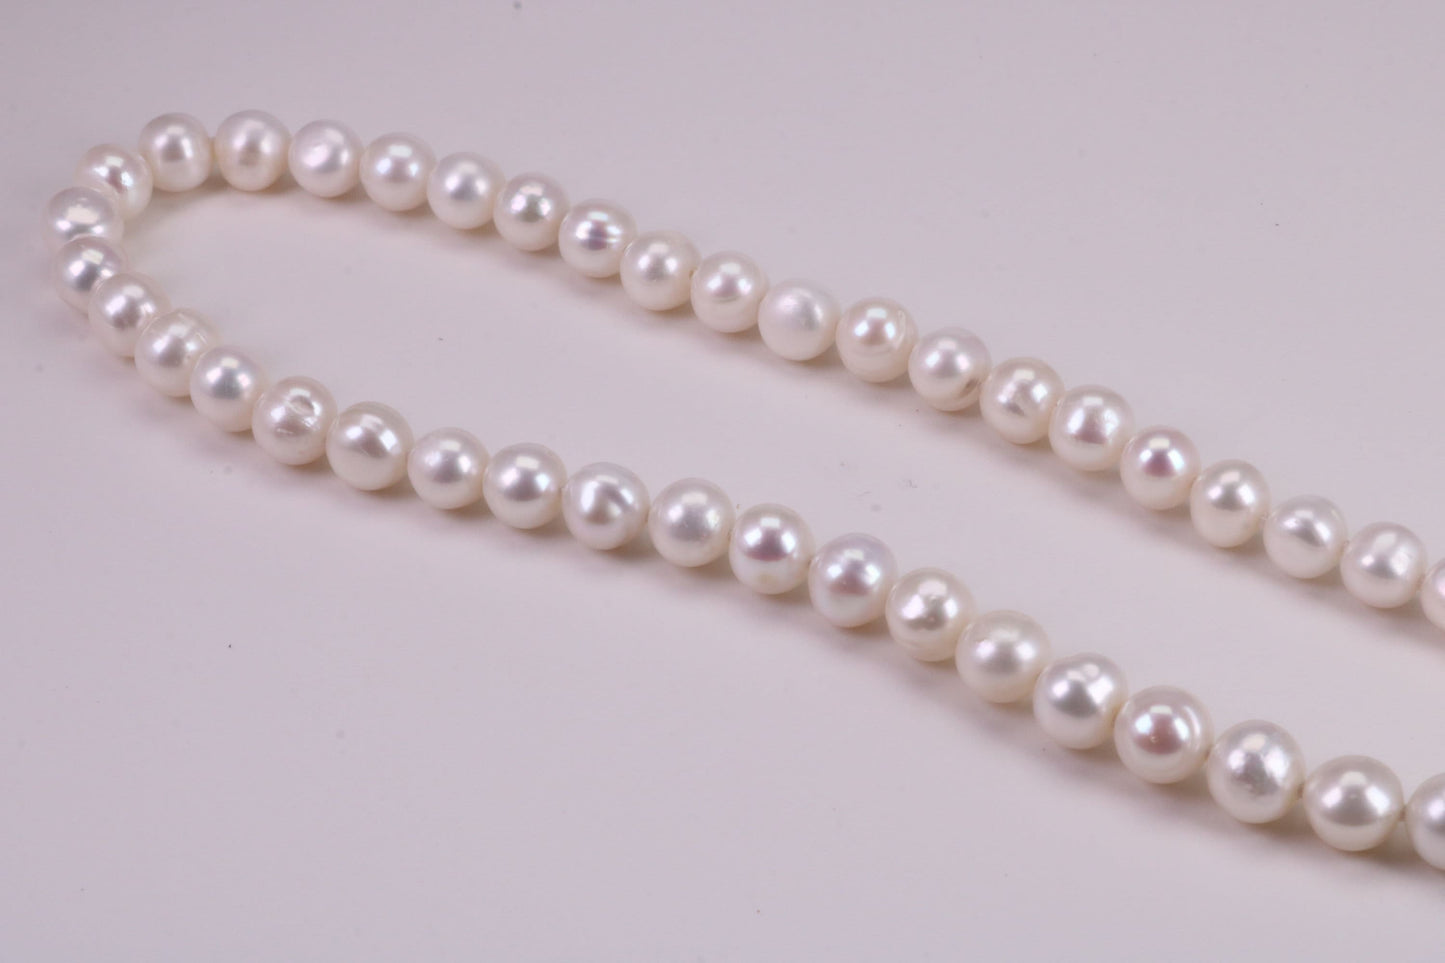 16 Inches Long Single Strand Natural 8 mm Round Pearl Necklace set in Silver